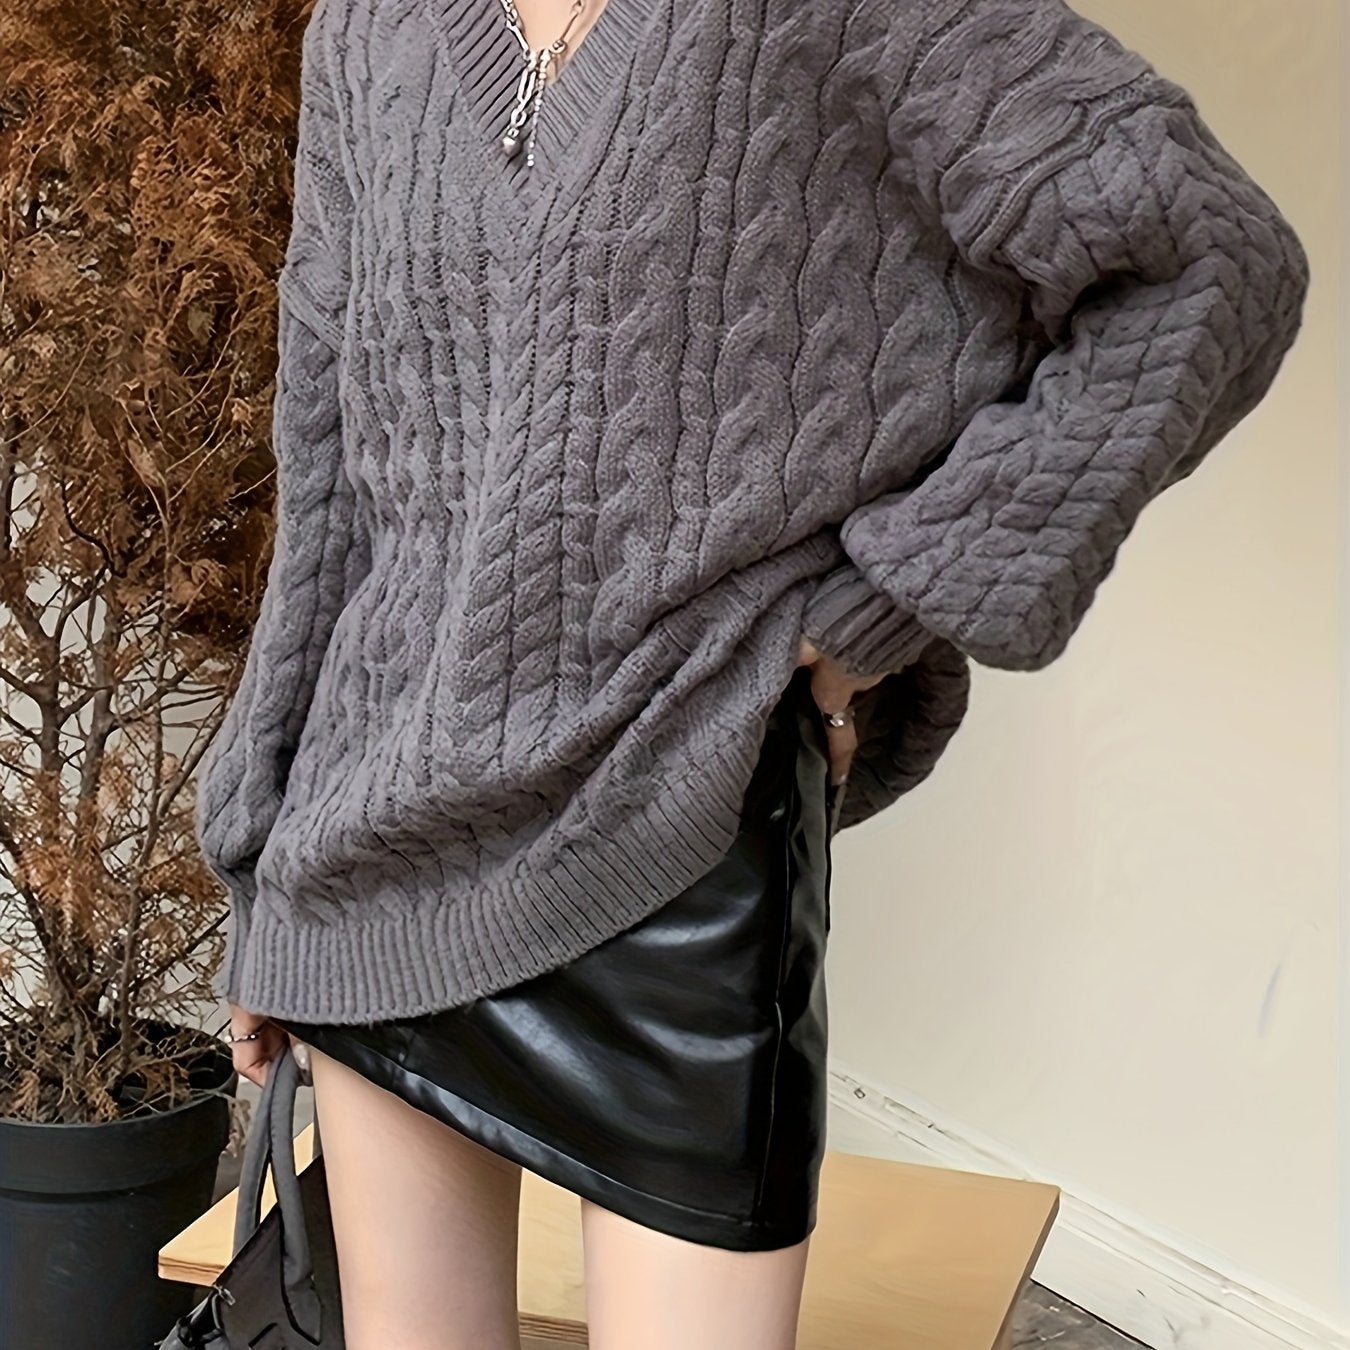 Antmvs Oversized V Neck Knitted Pullover Sweater, Elegant Long Sleeve Sweater For Fall & Winter, Women's Clothing